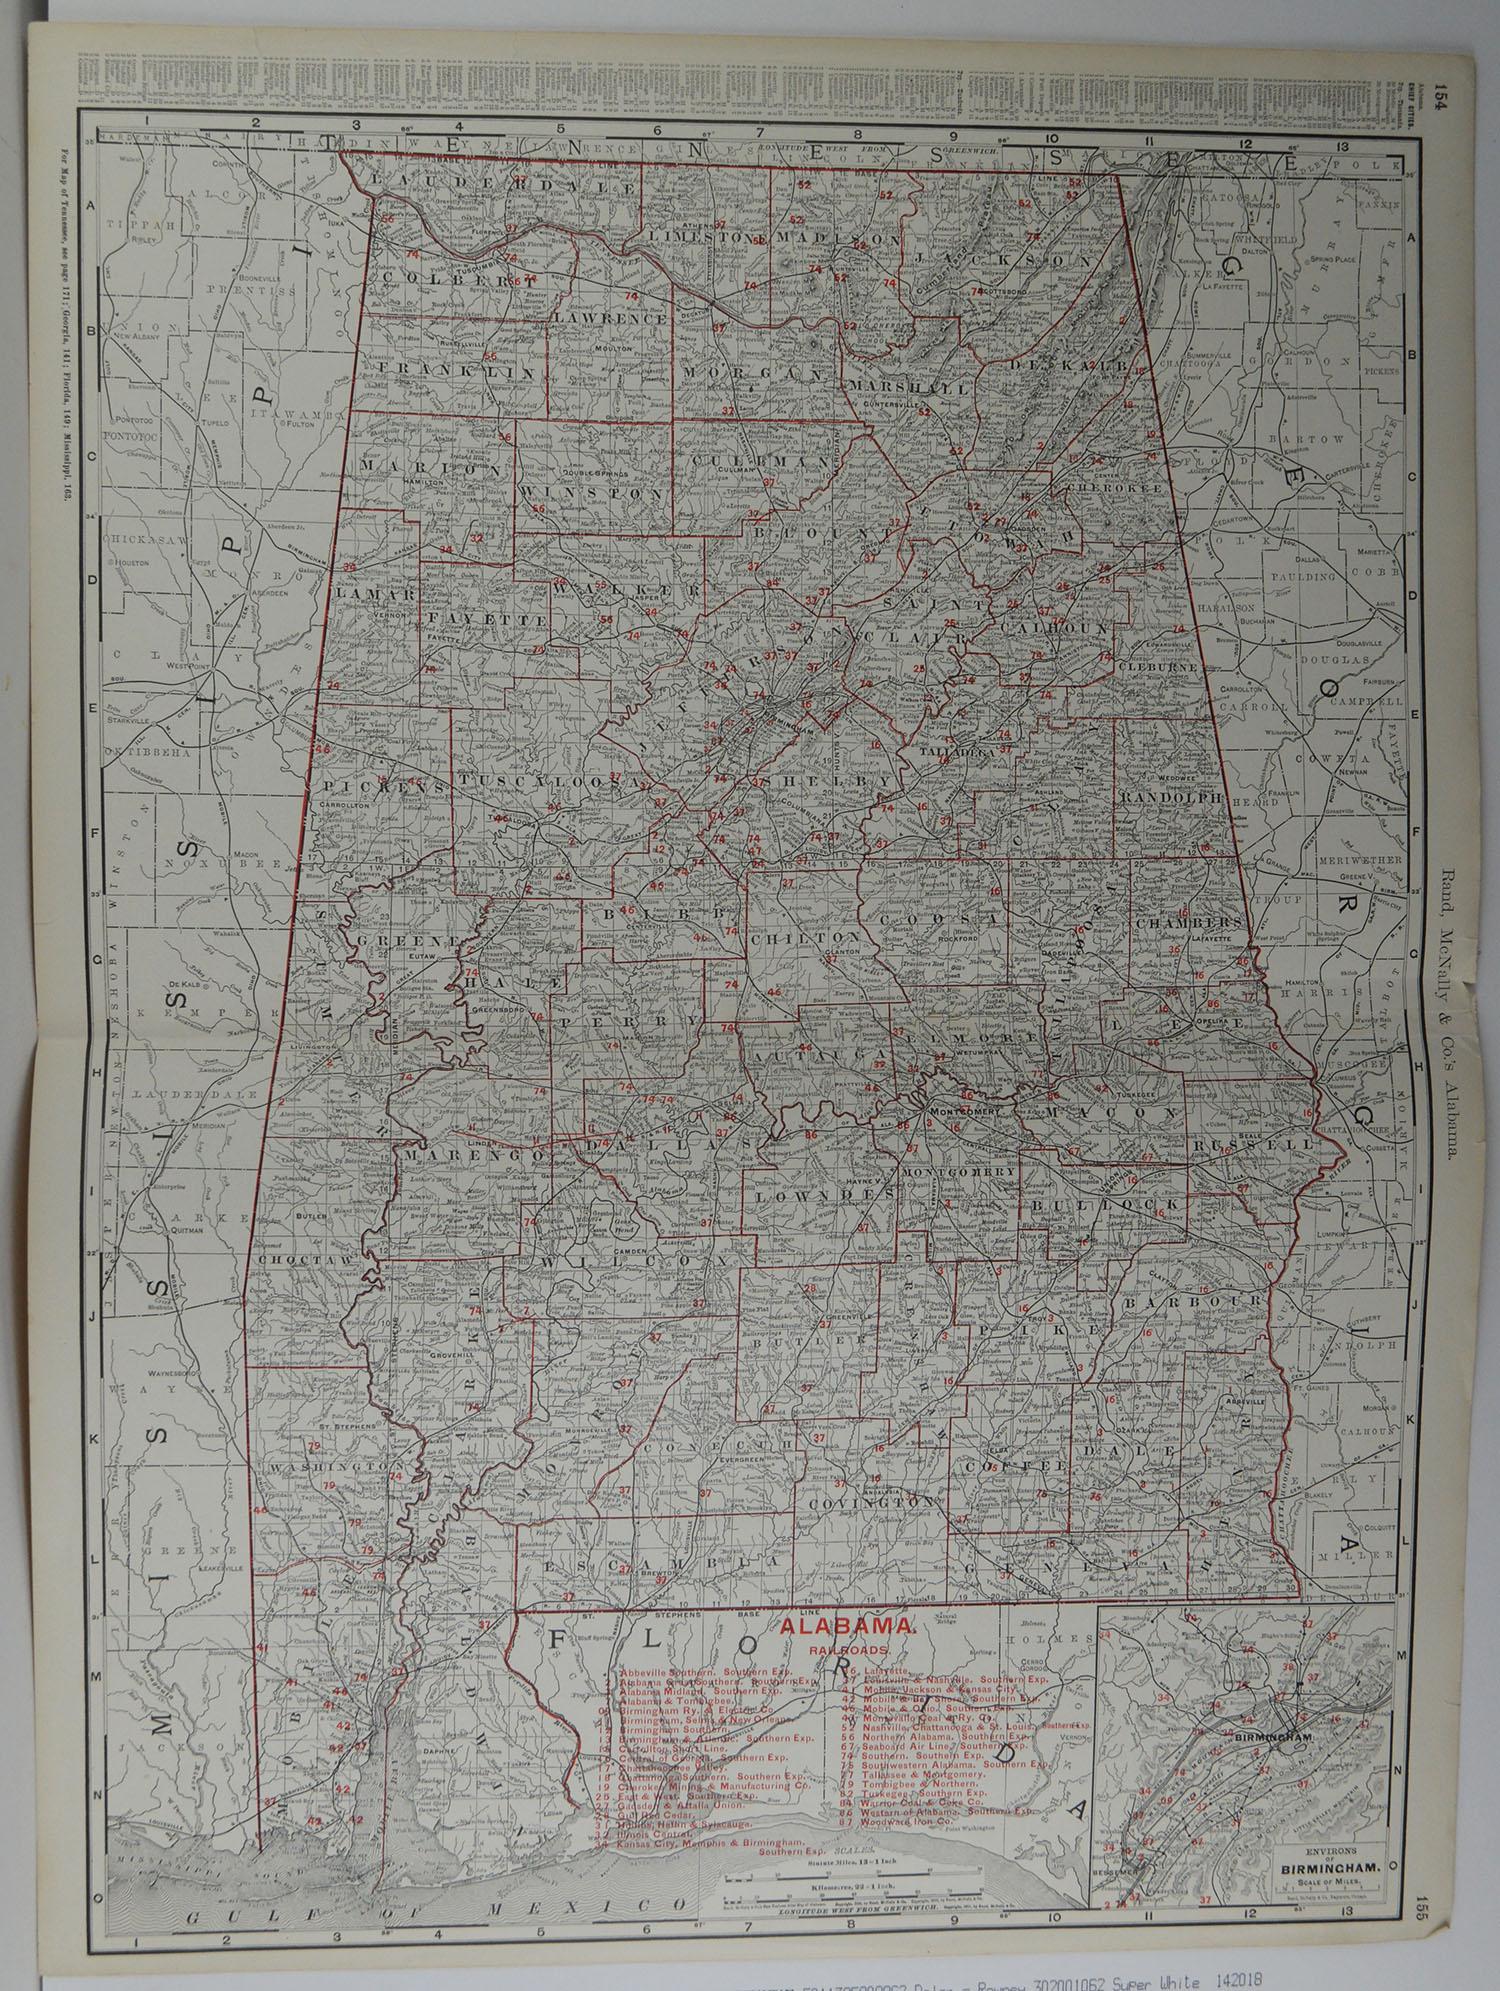 Fabulous monochrome map with red outline color 

Original color

By Rand, McNally & Co.

Published, circa 1900

Unframed

Minor edge tears.